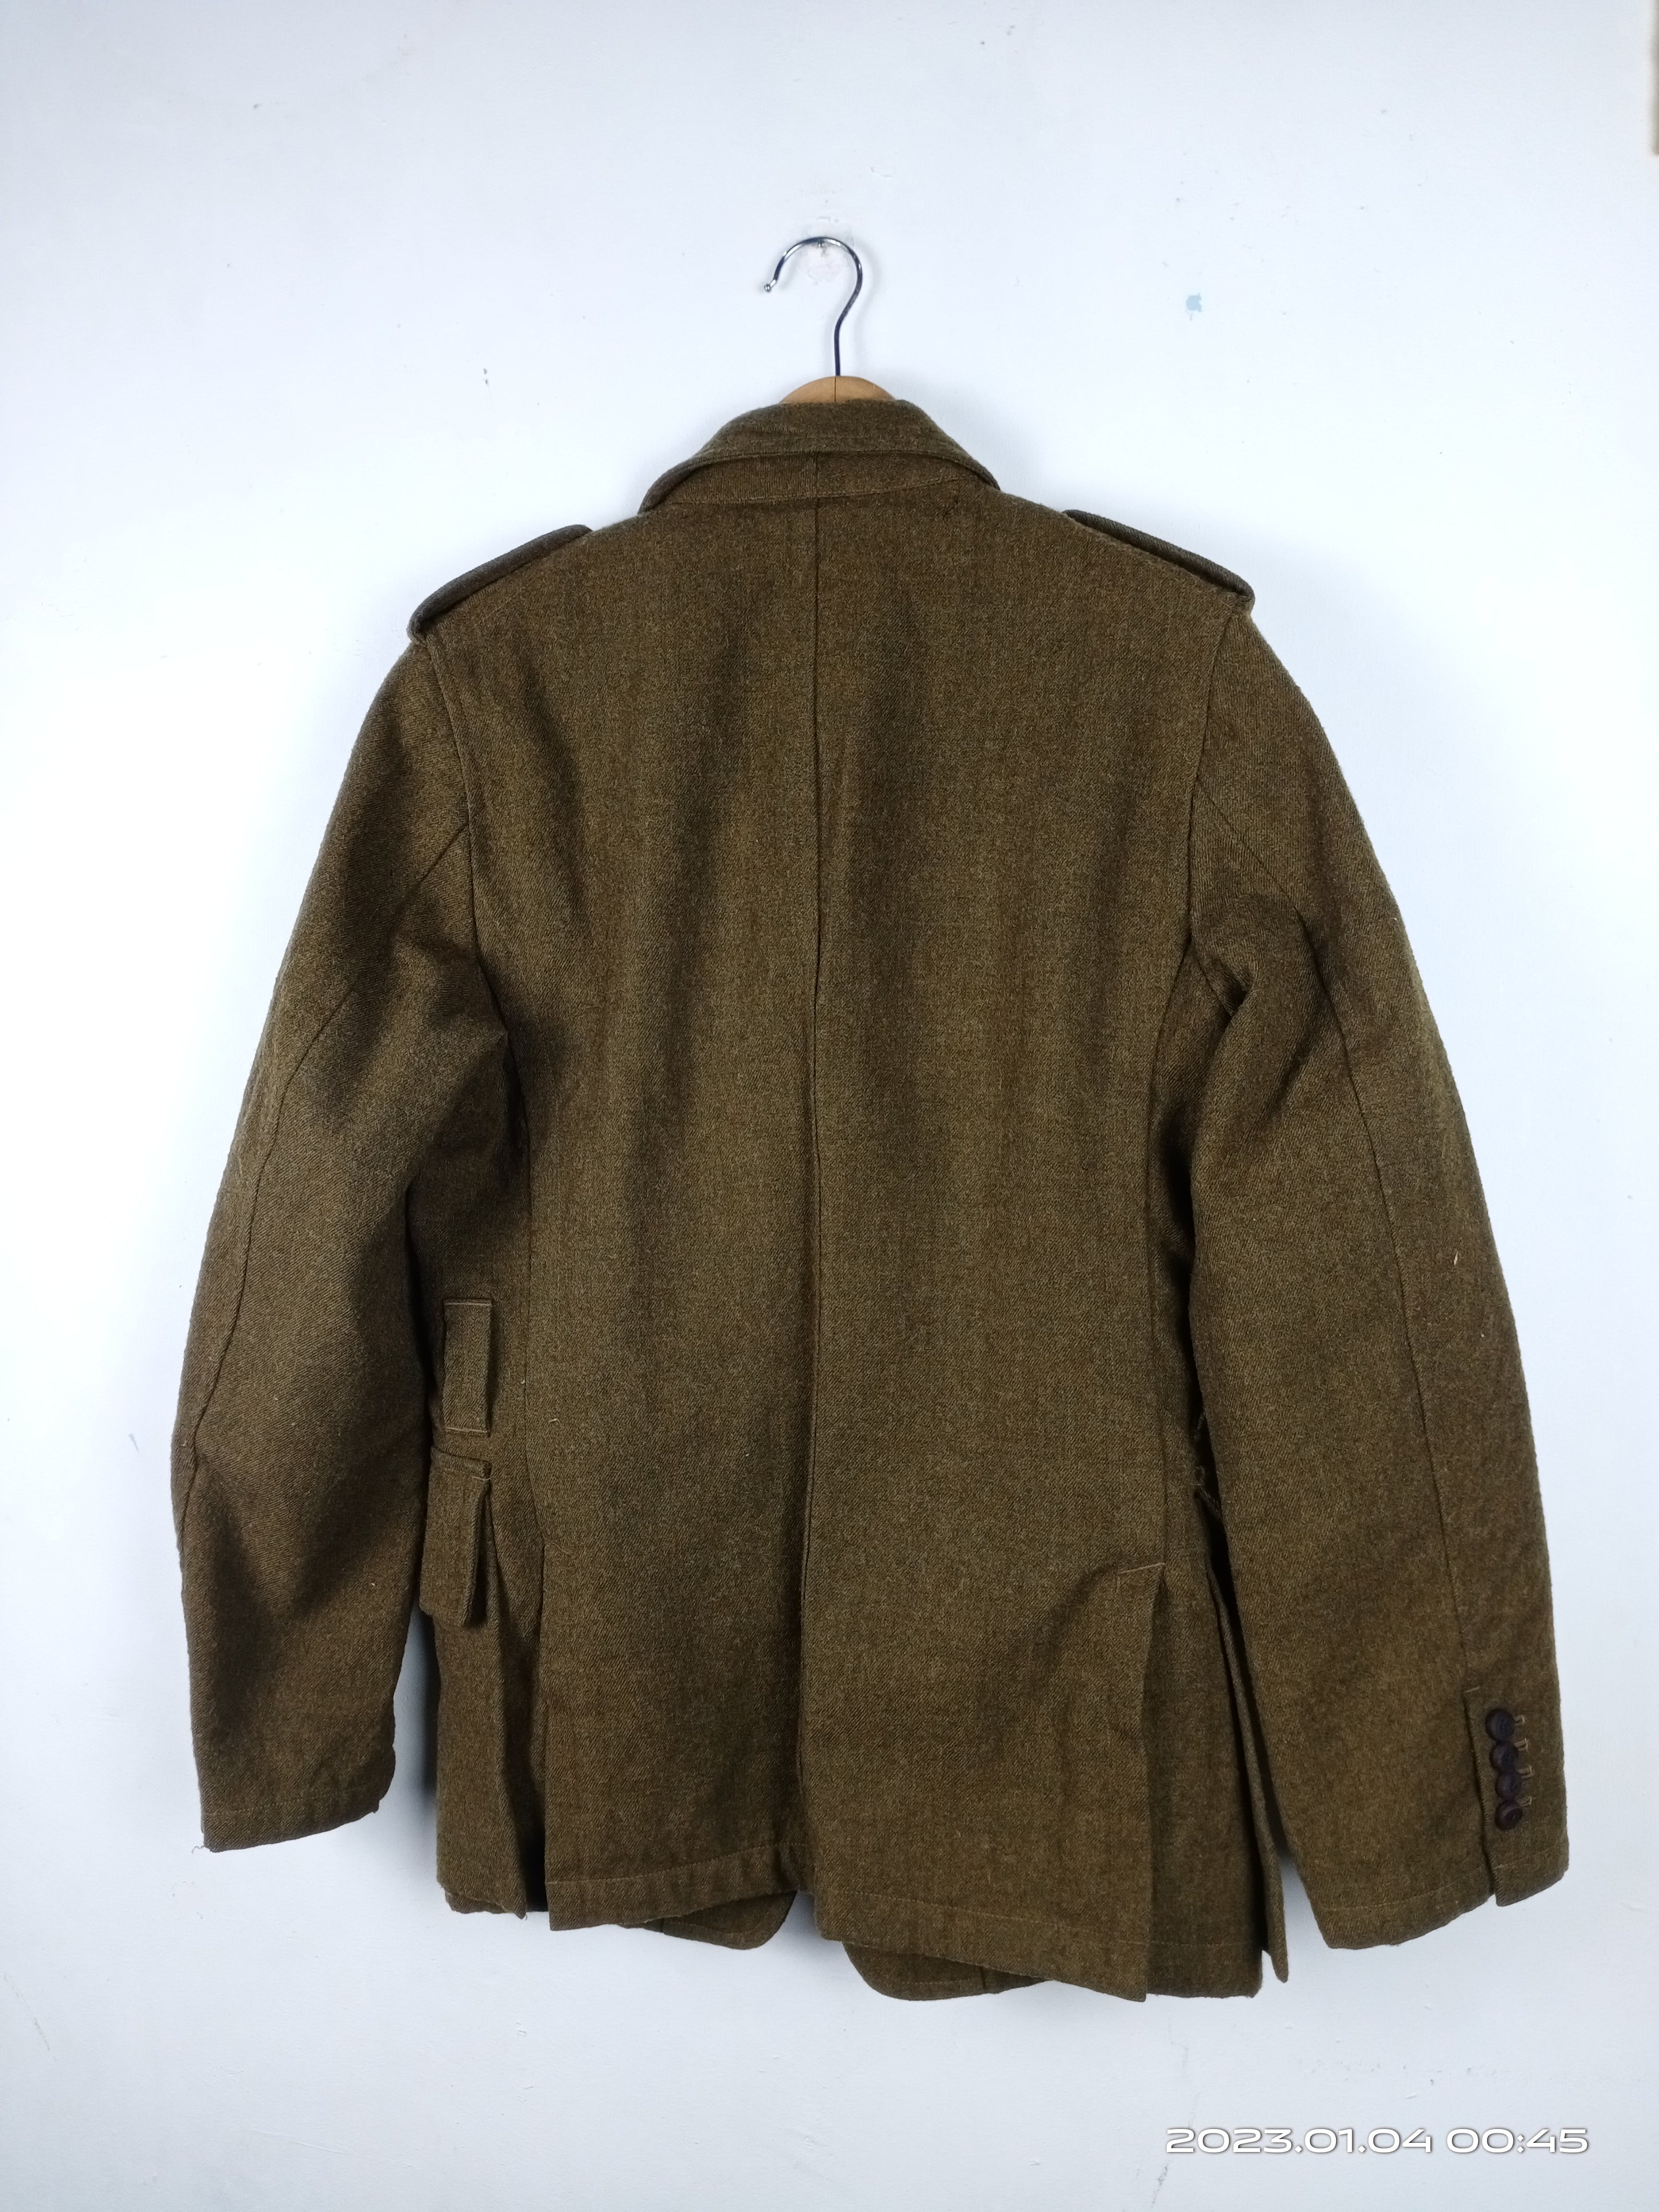 💥RARE💥Vintage Nigel Cabourn Wool Military Style Jacket - 20